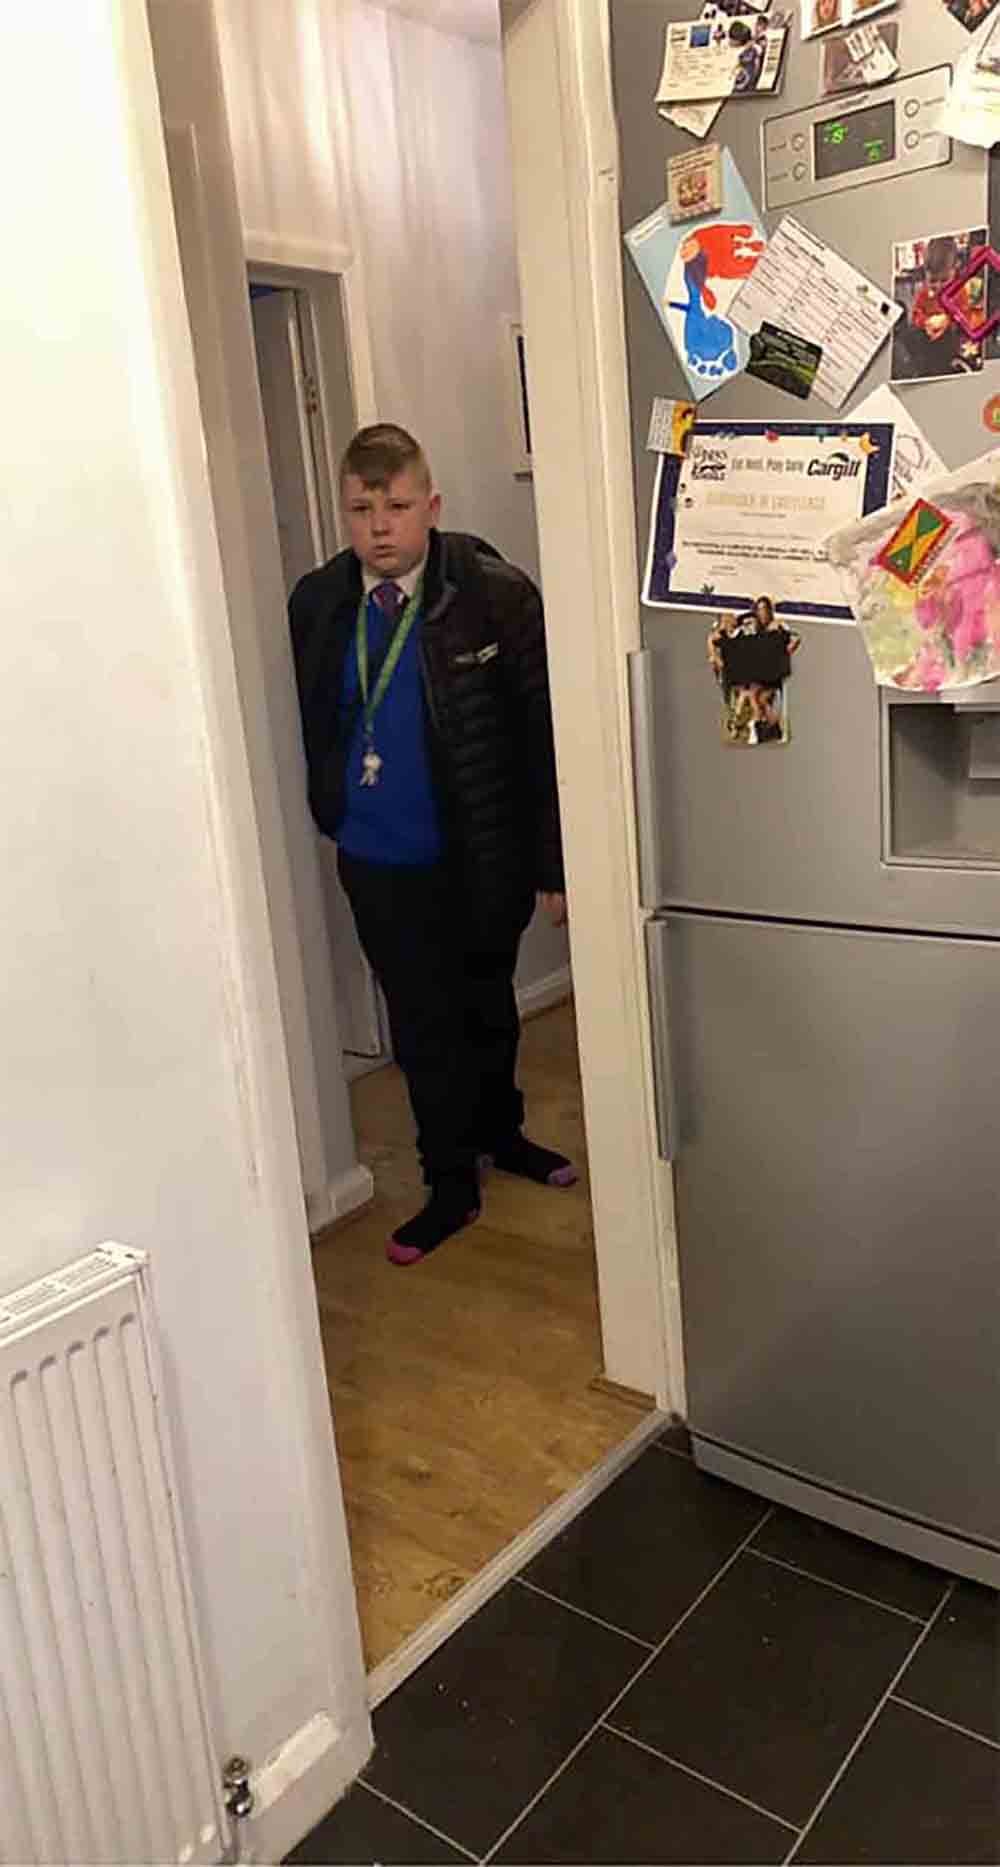 https://www.deadlinenews.co.uk/wp-content/uploads/2020/12/12_YEAR_OLD_HAS_DJ_EQUIPMENT_CONFISCATED_AFTER_RAVE_IN_SCHOOL_TOILETS_DN05.jpg